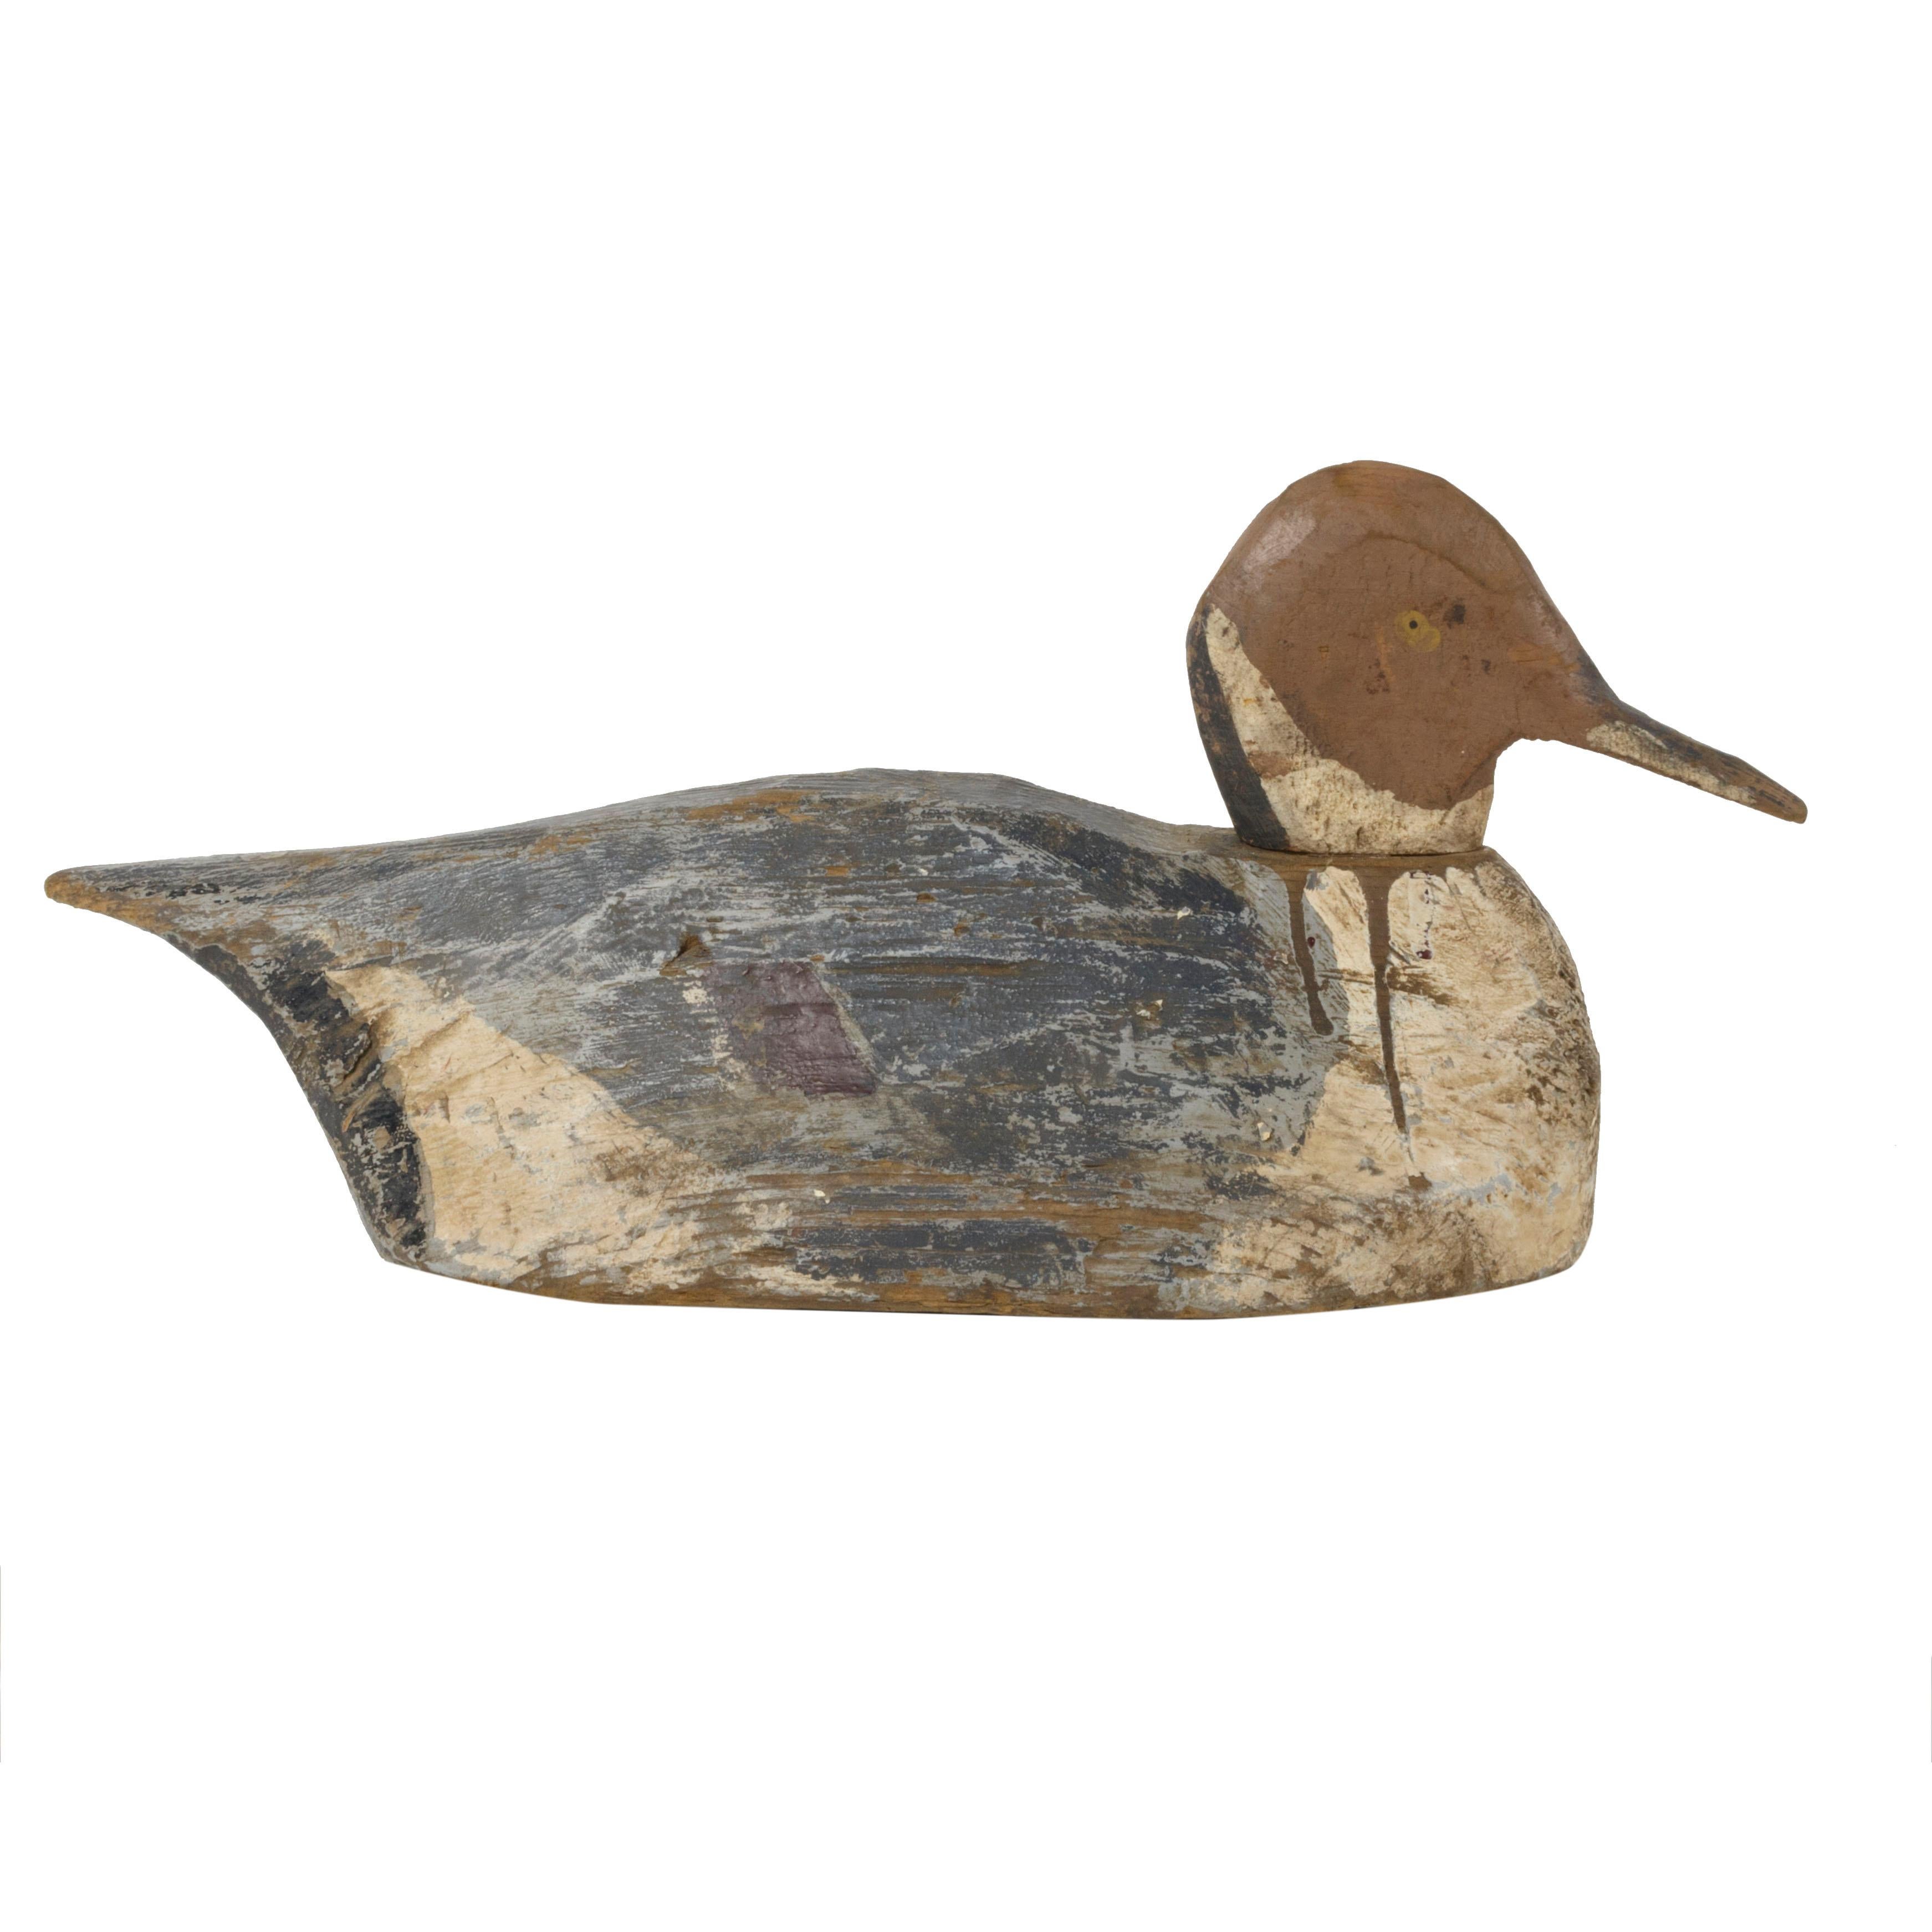 Rig of four hunter made, folky pintails. Two drakes, two hens. Original paint. Came from the East. Use consistent with age. Neat collectors set. 

PERIOD: Turn of the Century
ORIGIN: East
SIZE: 13